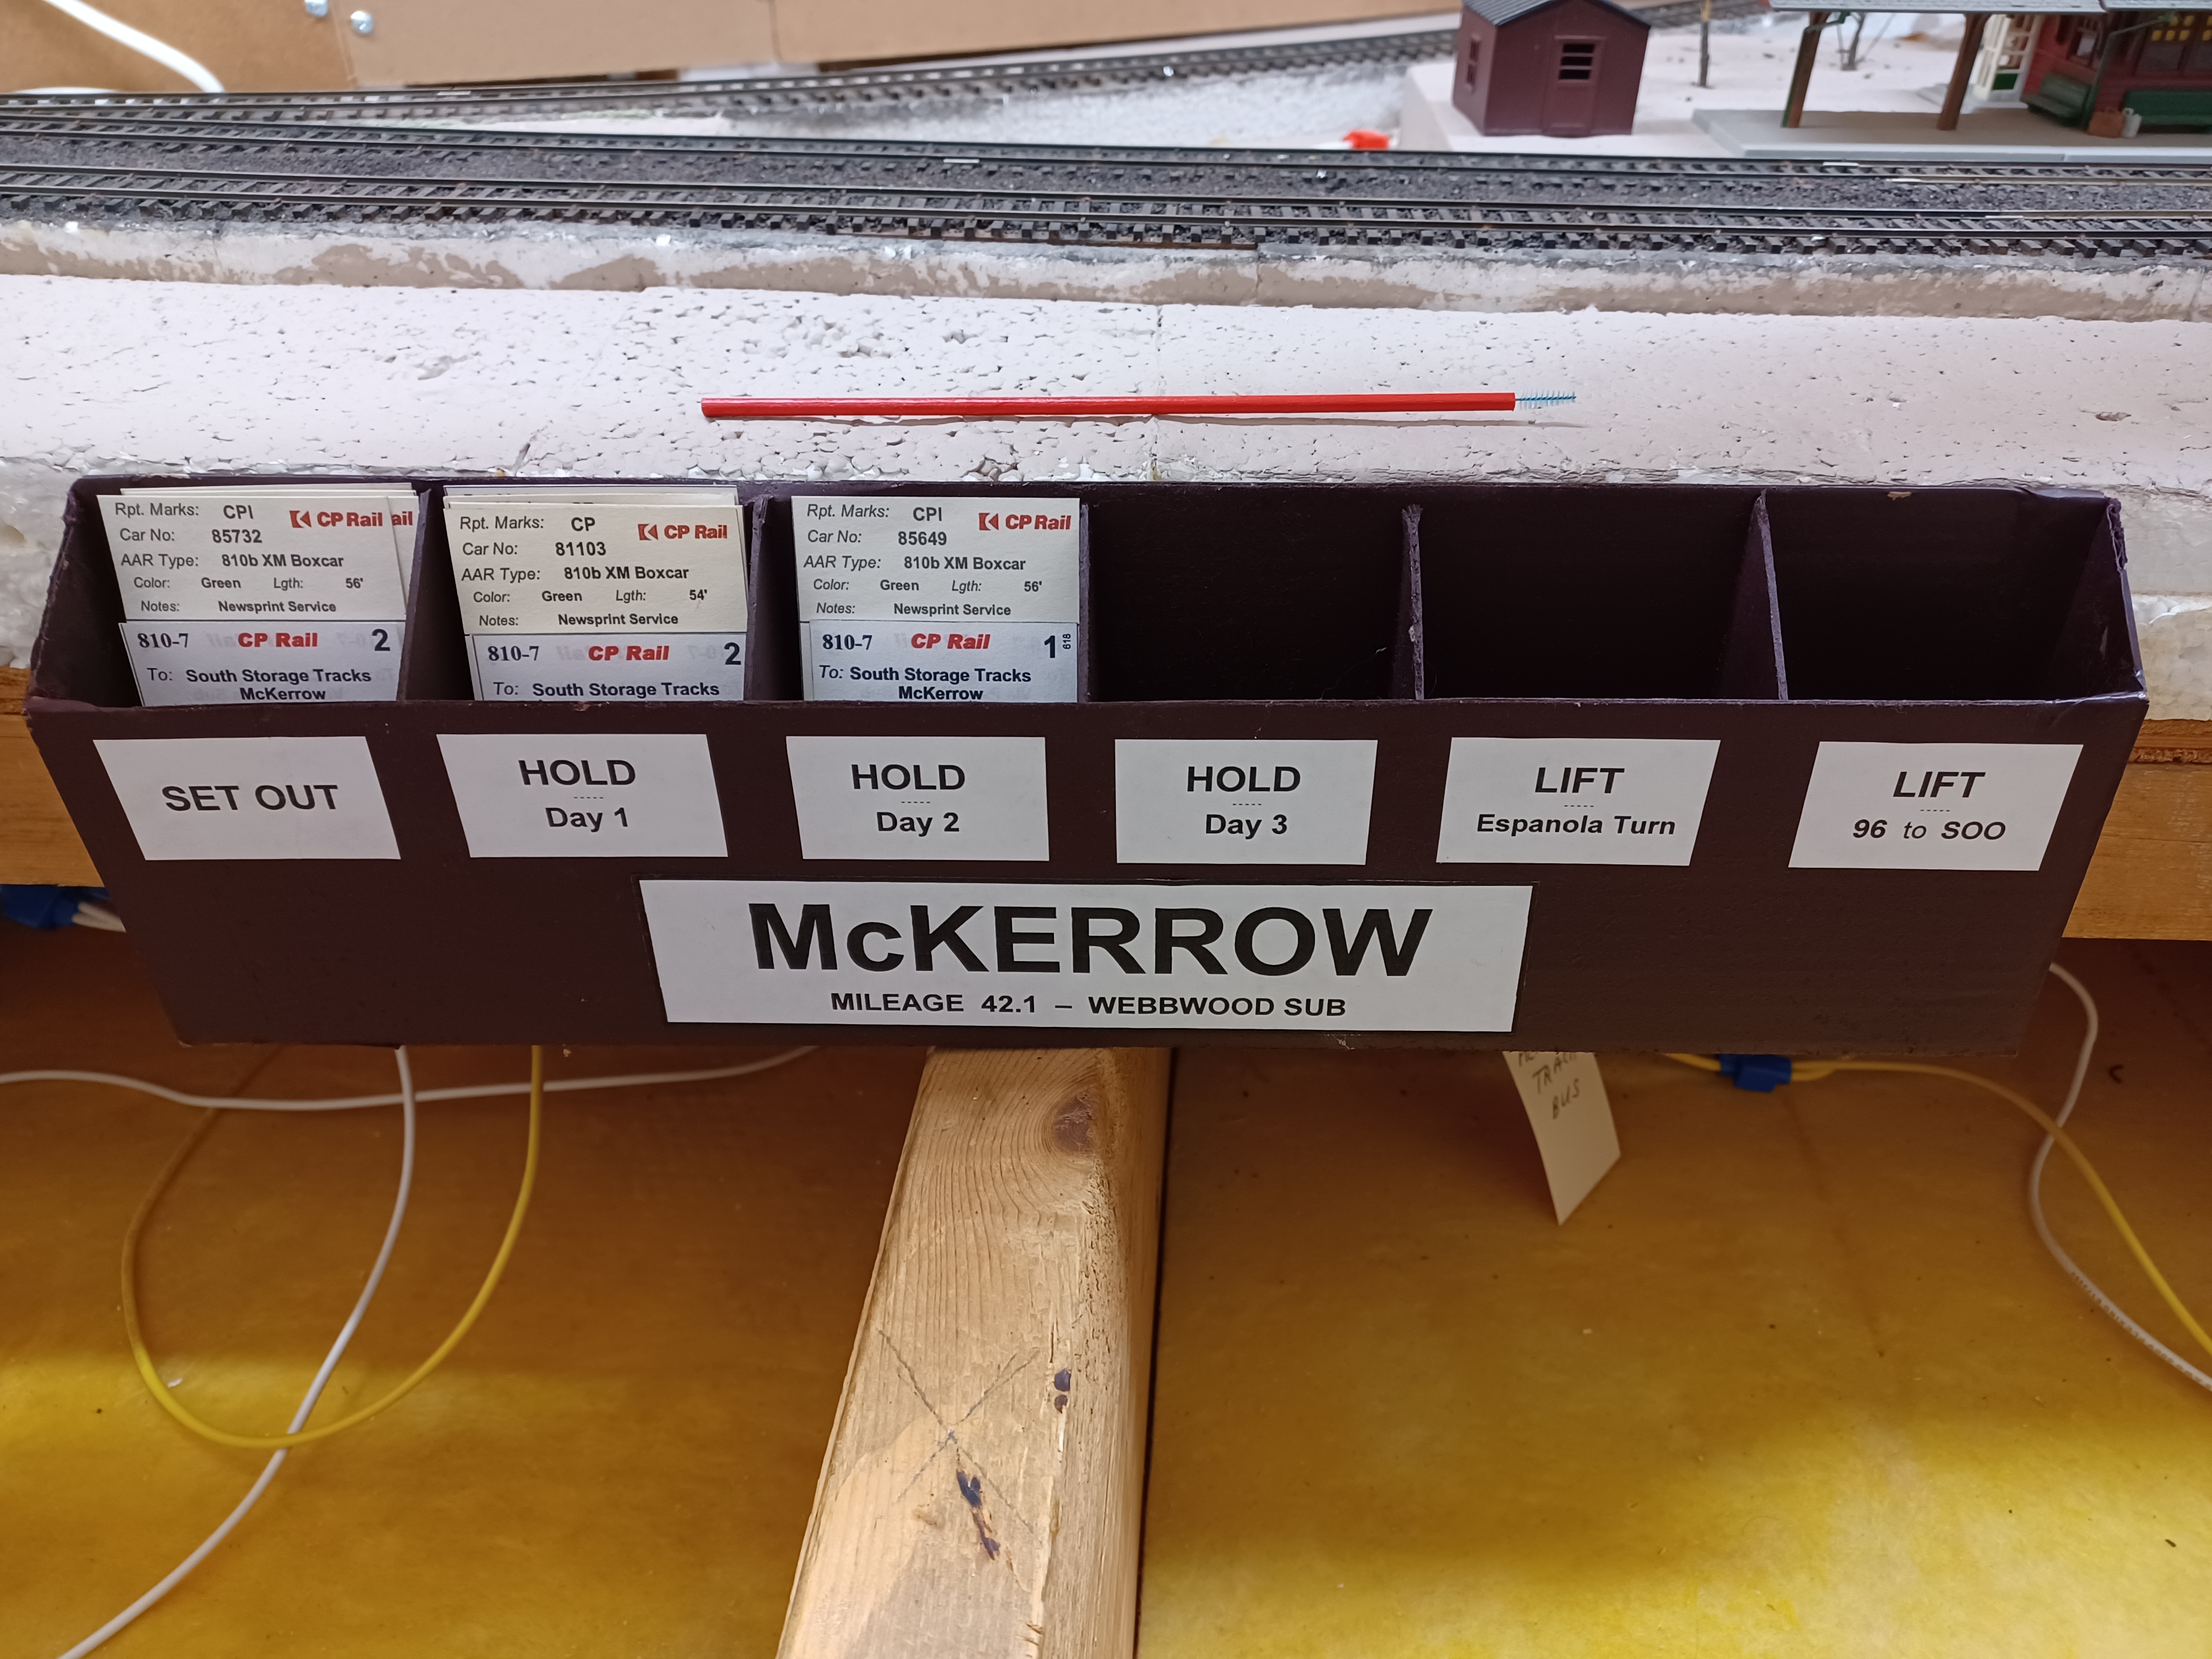 A waybill file box is located anywhere where cars are switched and spotted. In this example, McKerrow Ont. sees CP paper-service boxcars stored for use at the nearby E.B. Eddy paper mill in Espanola. Cars switched into the storage tracks here have their waybills placed into the 'Setout' pocket. These orders are then rotated through the 'Hold' pockets as determined by waybill (simulating the customer's lag in requesting cars to load). Finally the car is ready to 'Lift' - either an empty being requested by E.B. Eddy for their mill (picked up by the Espanola Turn) - or a loaded car dropped here by the outbound turn, which is heading for the US Midwest (via S.S.Marie) and must be lifted by local train #96 heading for the Soo.